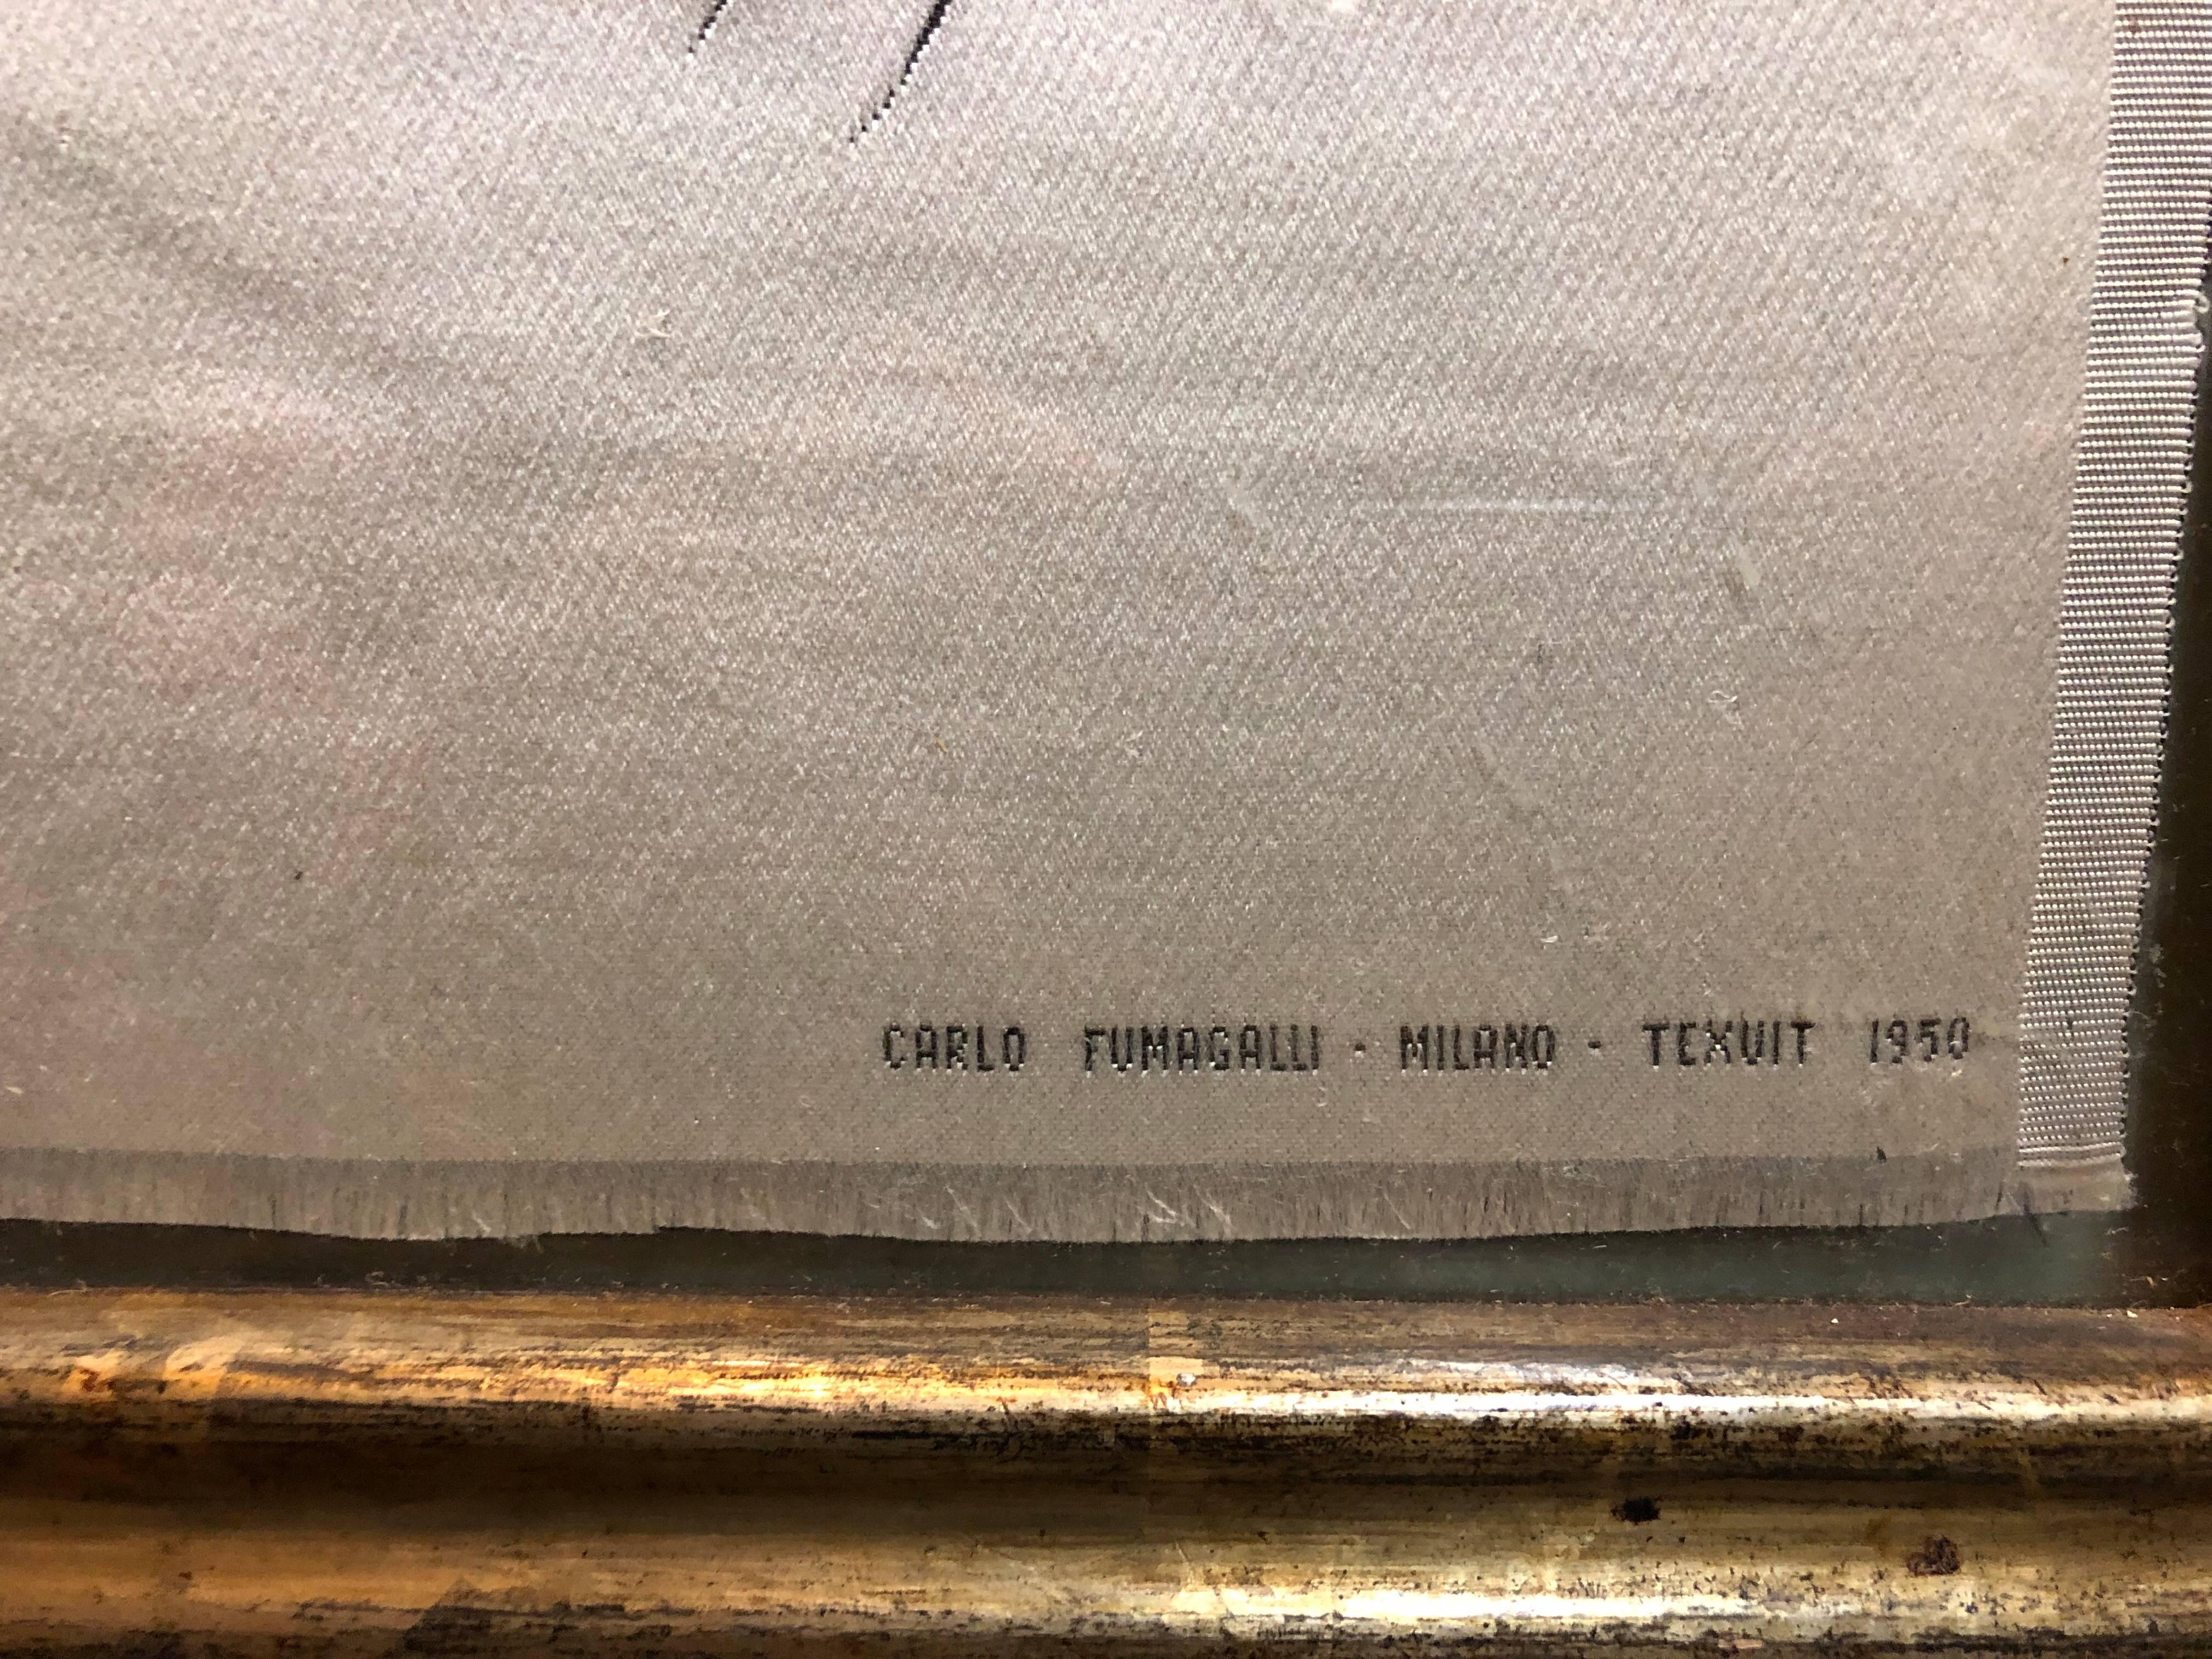 Signed Carlo Fumagalli Milano Texuit 1950 and signed Dali in the weaving. rare Silk Stevengraph style Jacquard-type loom.  Stevensgraph. Framed with glass on both sides. 

Salvador Dali Biography 1904-1989 
Salvador Dali is considered as the